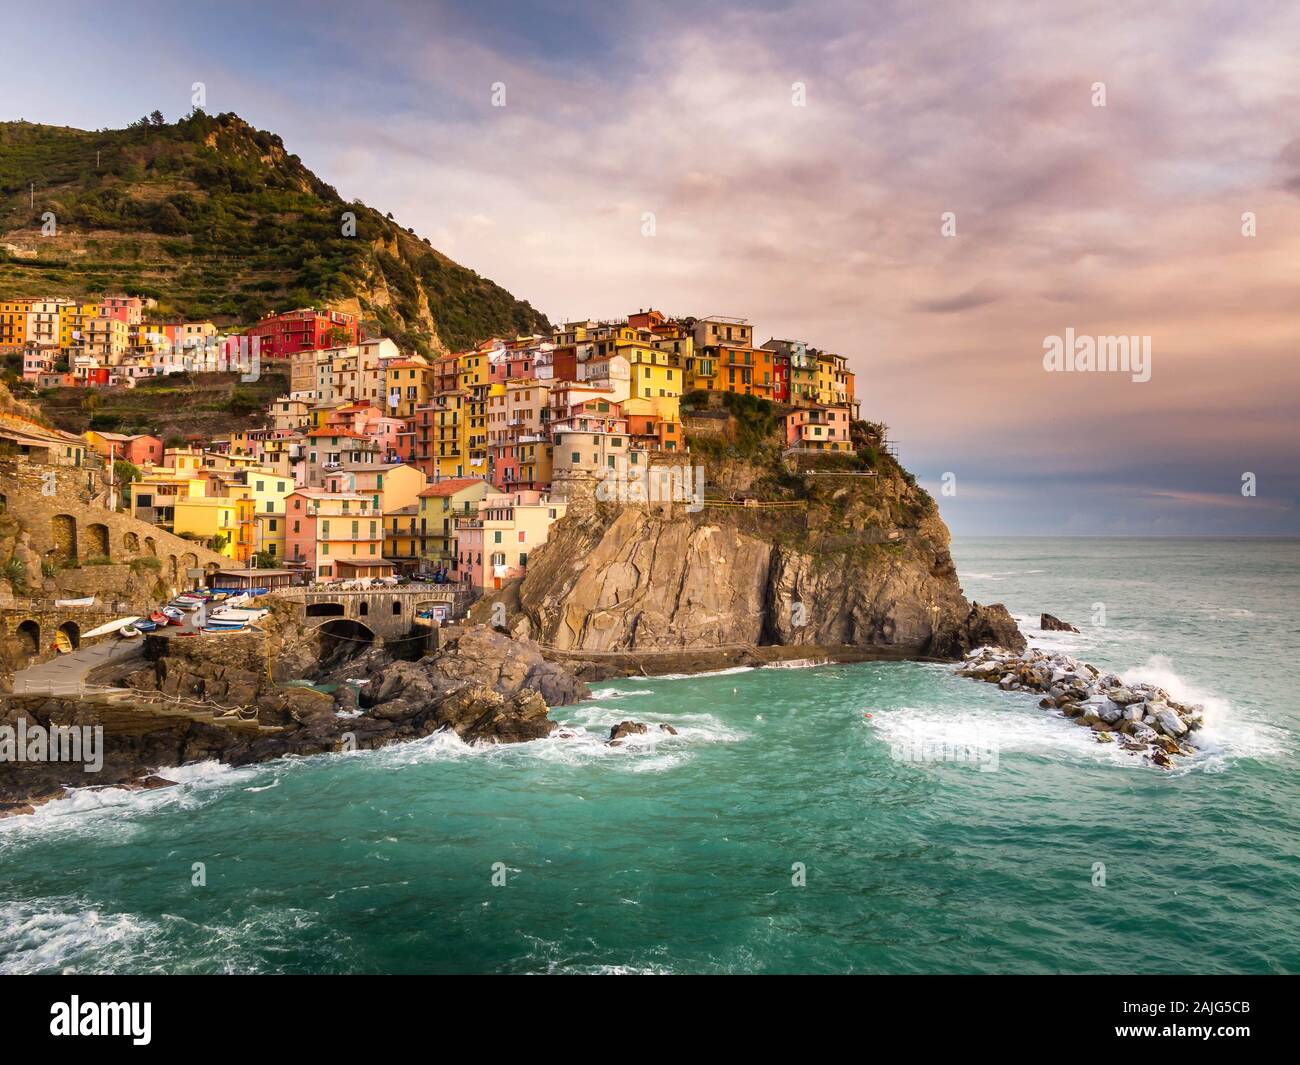 Manarola, Cinque Terre (Five Lands), Liguria, Italy: Village perched on a hill, typical colorful houses. Cinque Terre National Park is a UNESCO Site Stock Photo